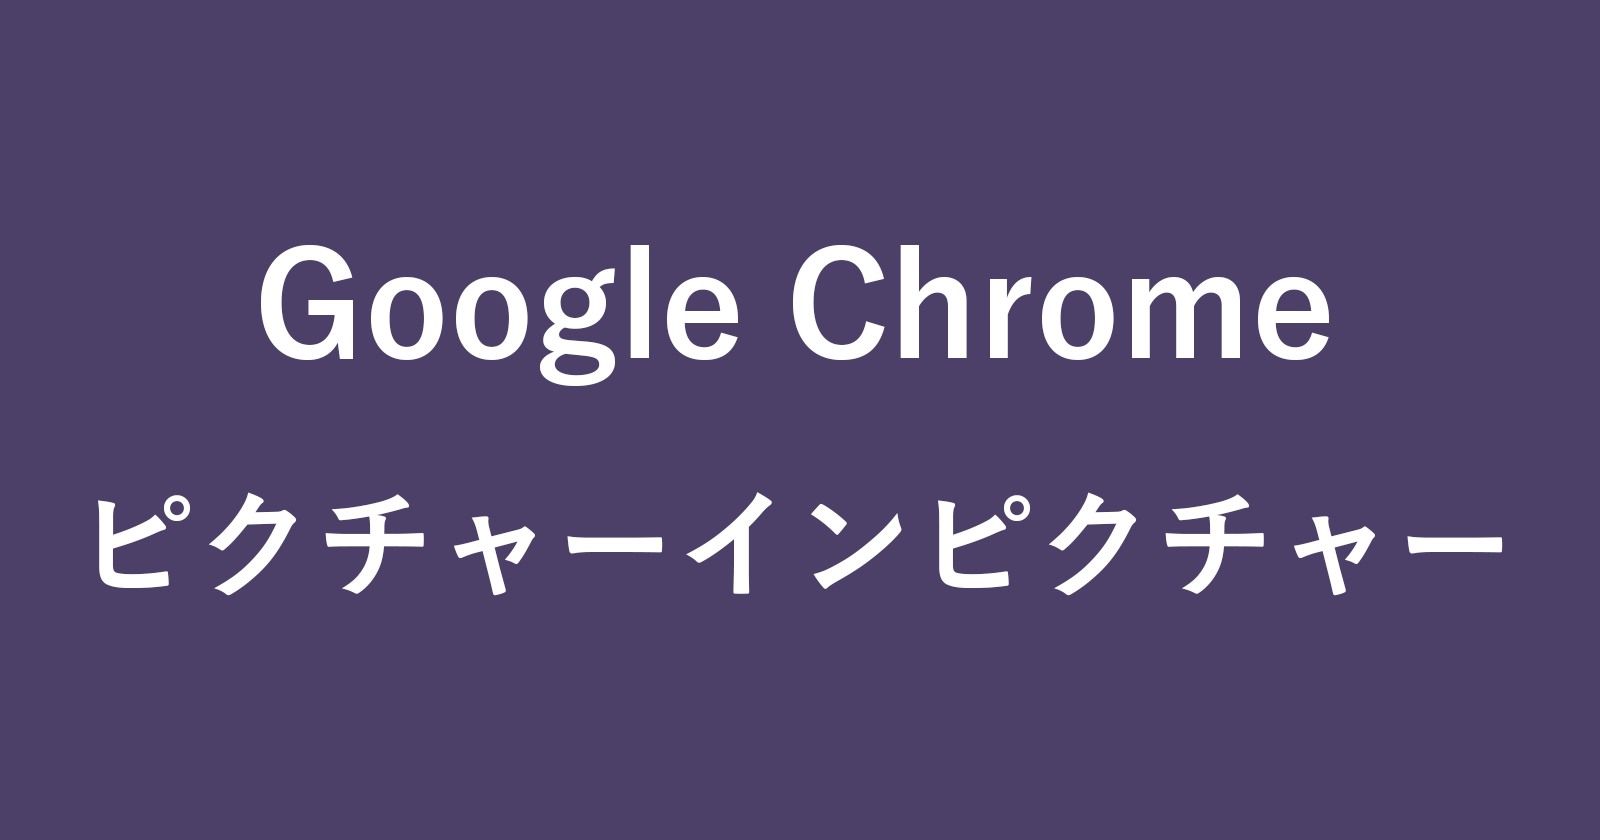 chrome picture in